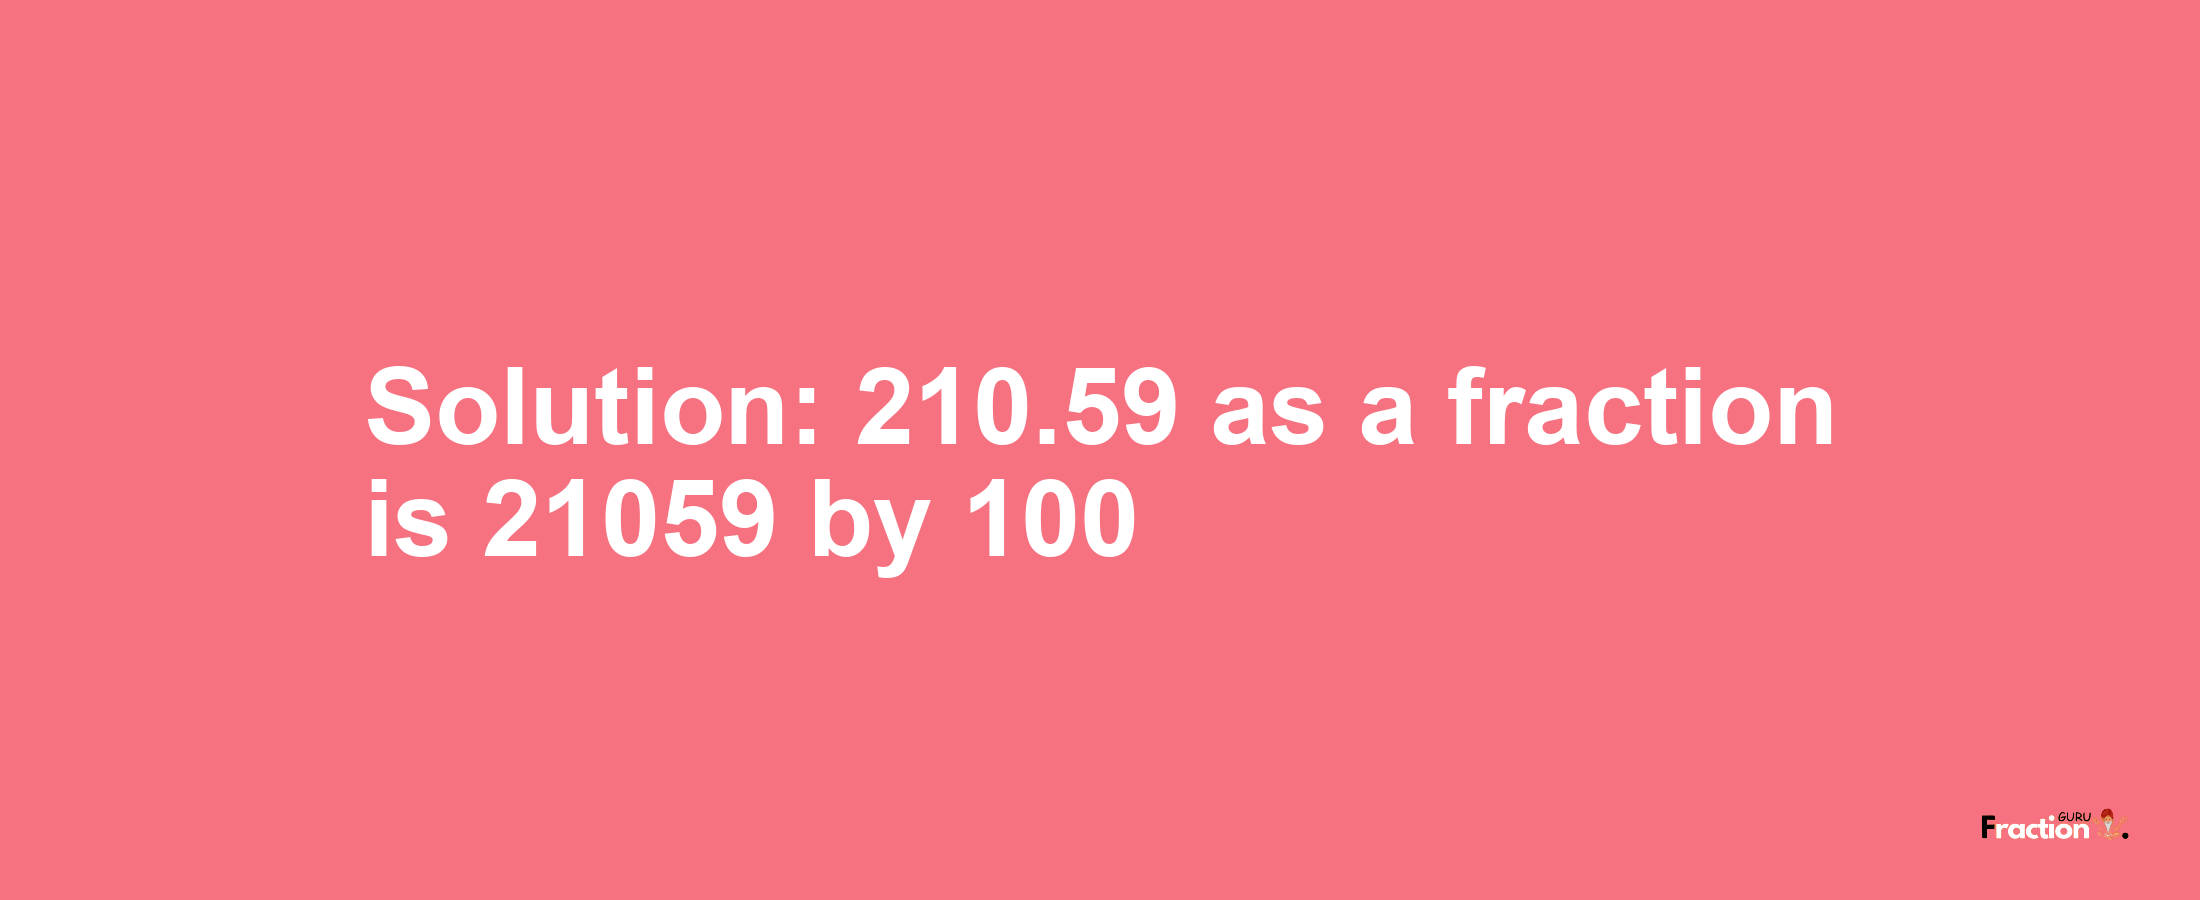 Solution:210.59 as a fraction is 21059/100